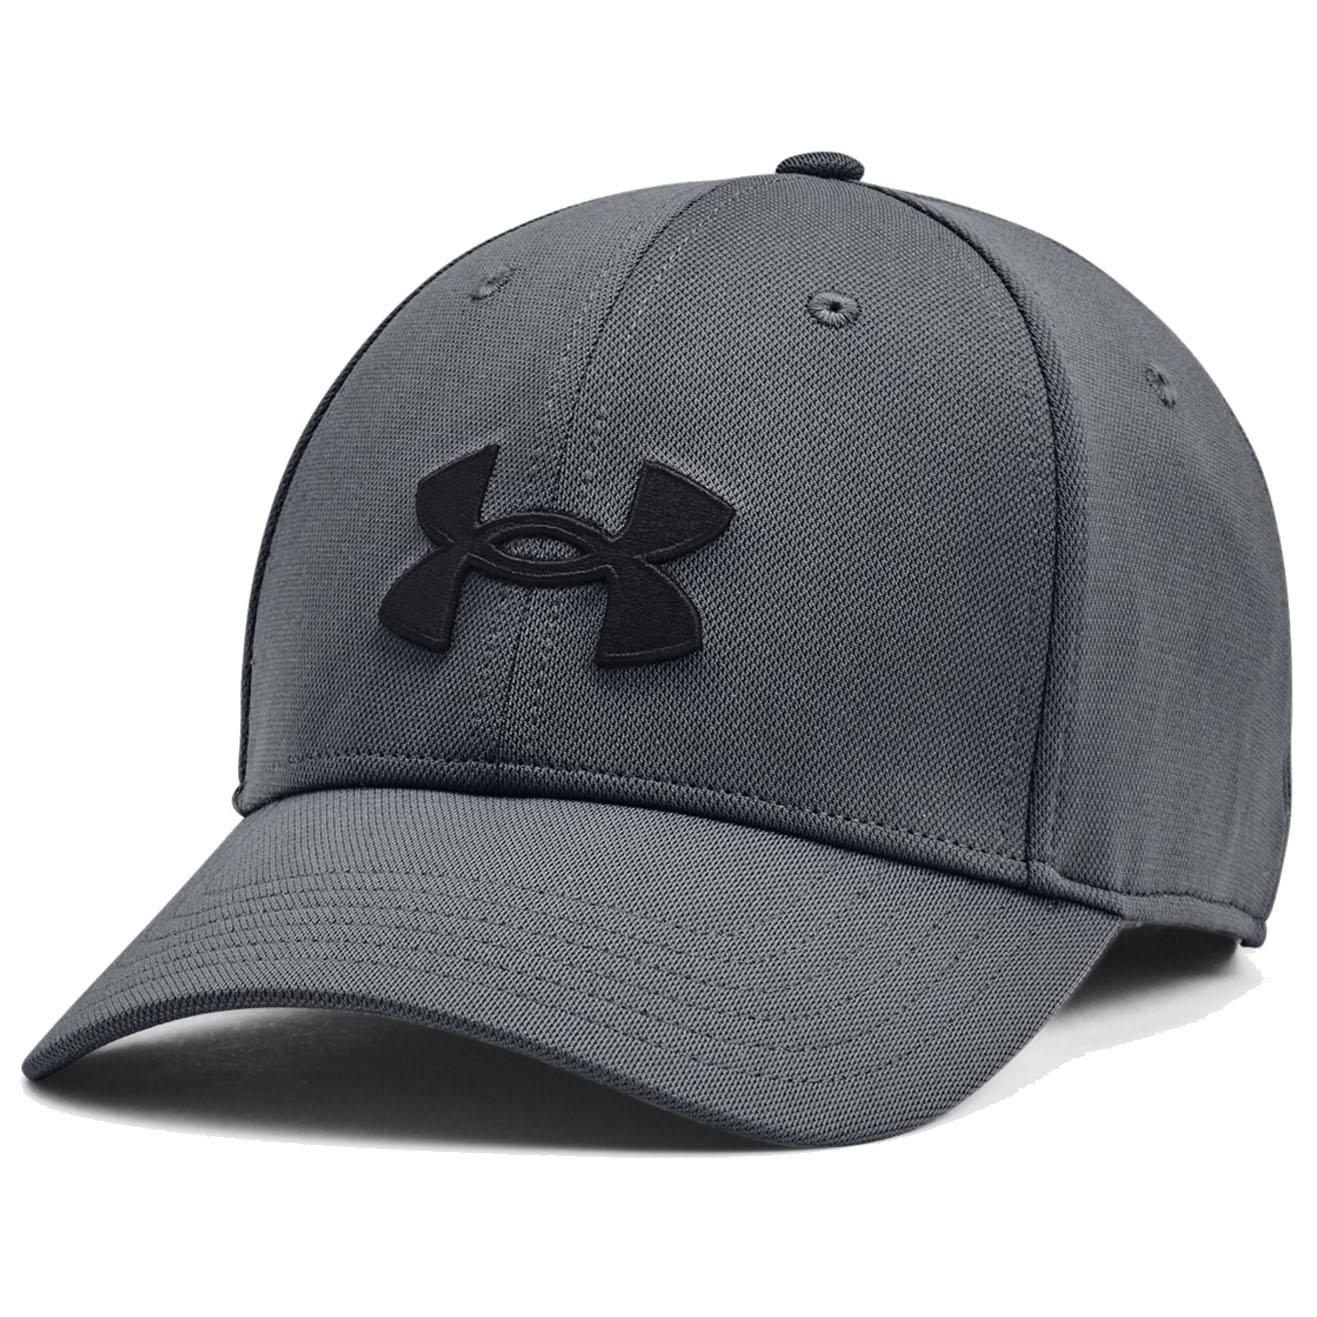 Selected image for UNDER ARMOUR Cap MEN'S UA BLITZING ADЈ